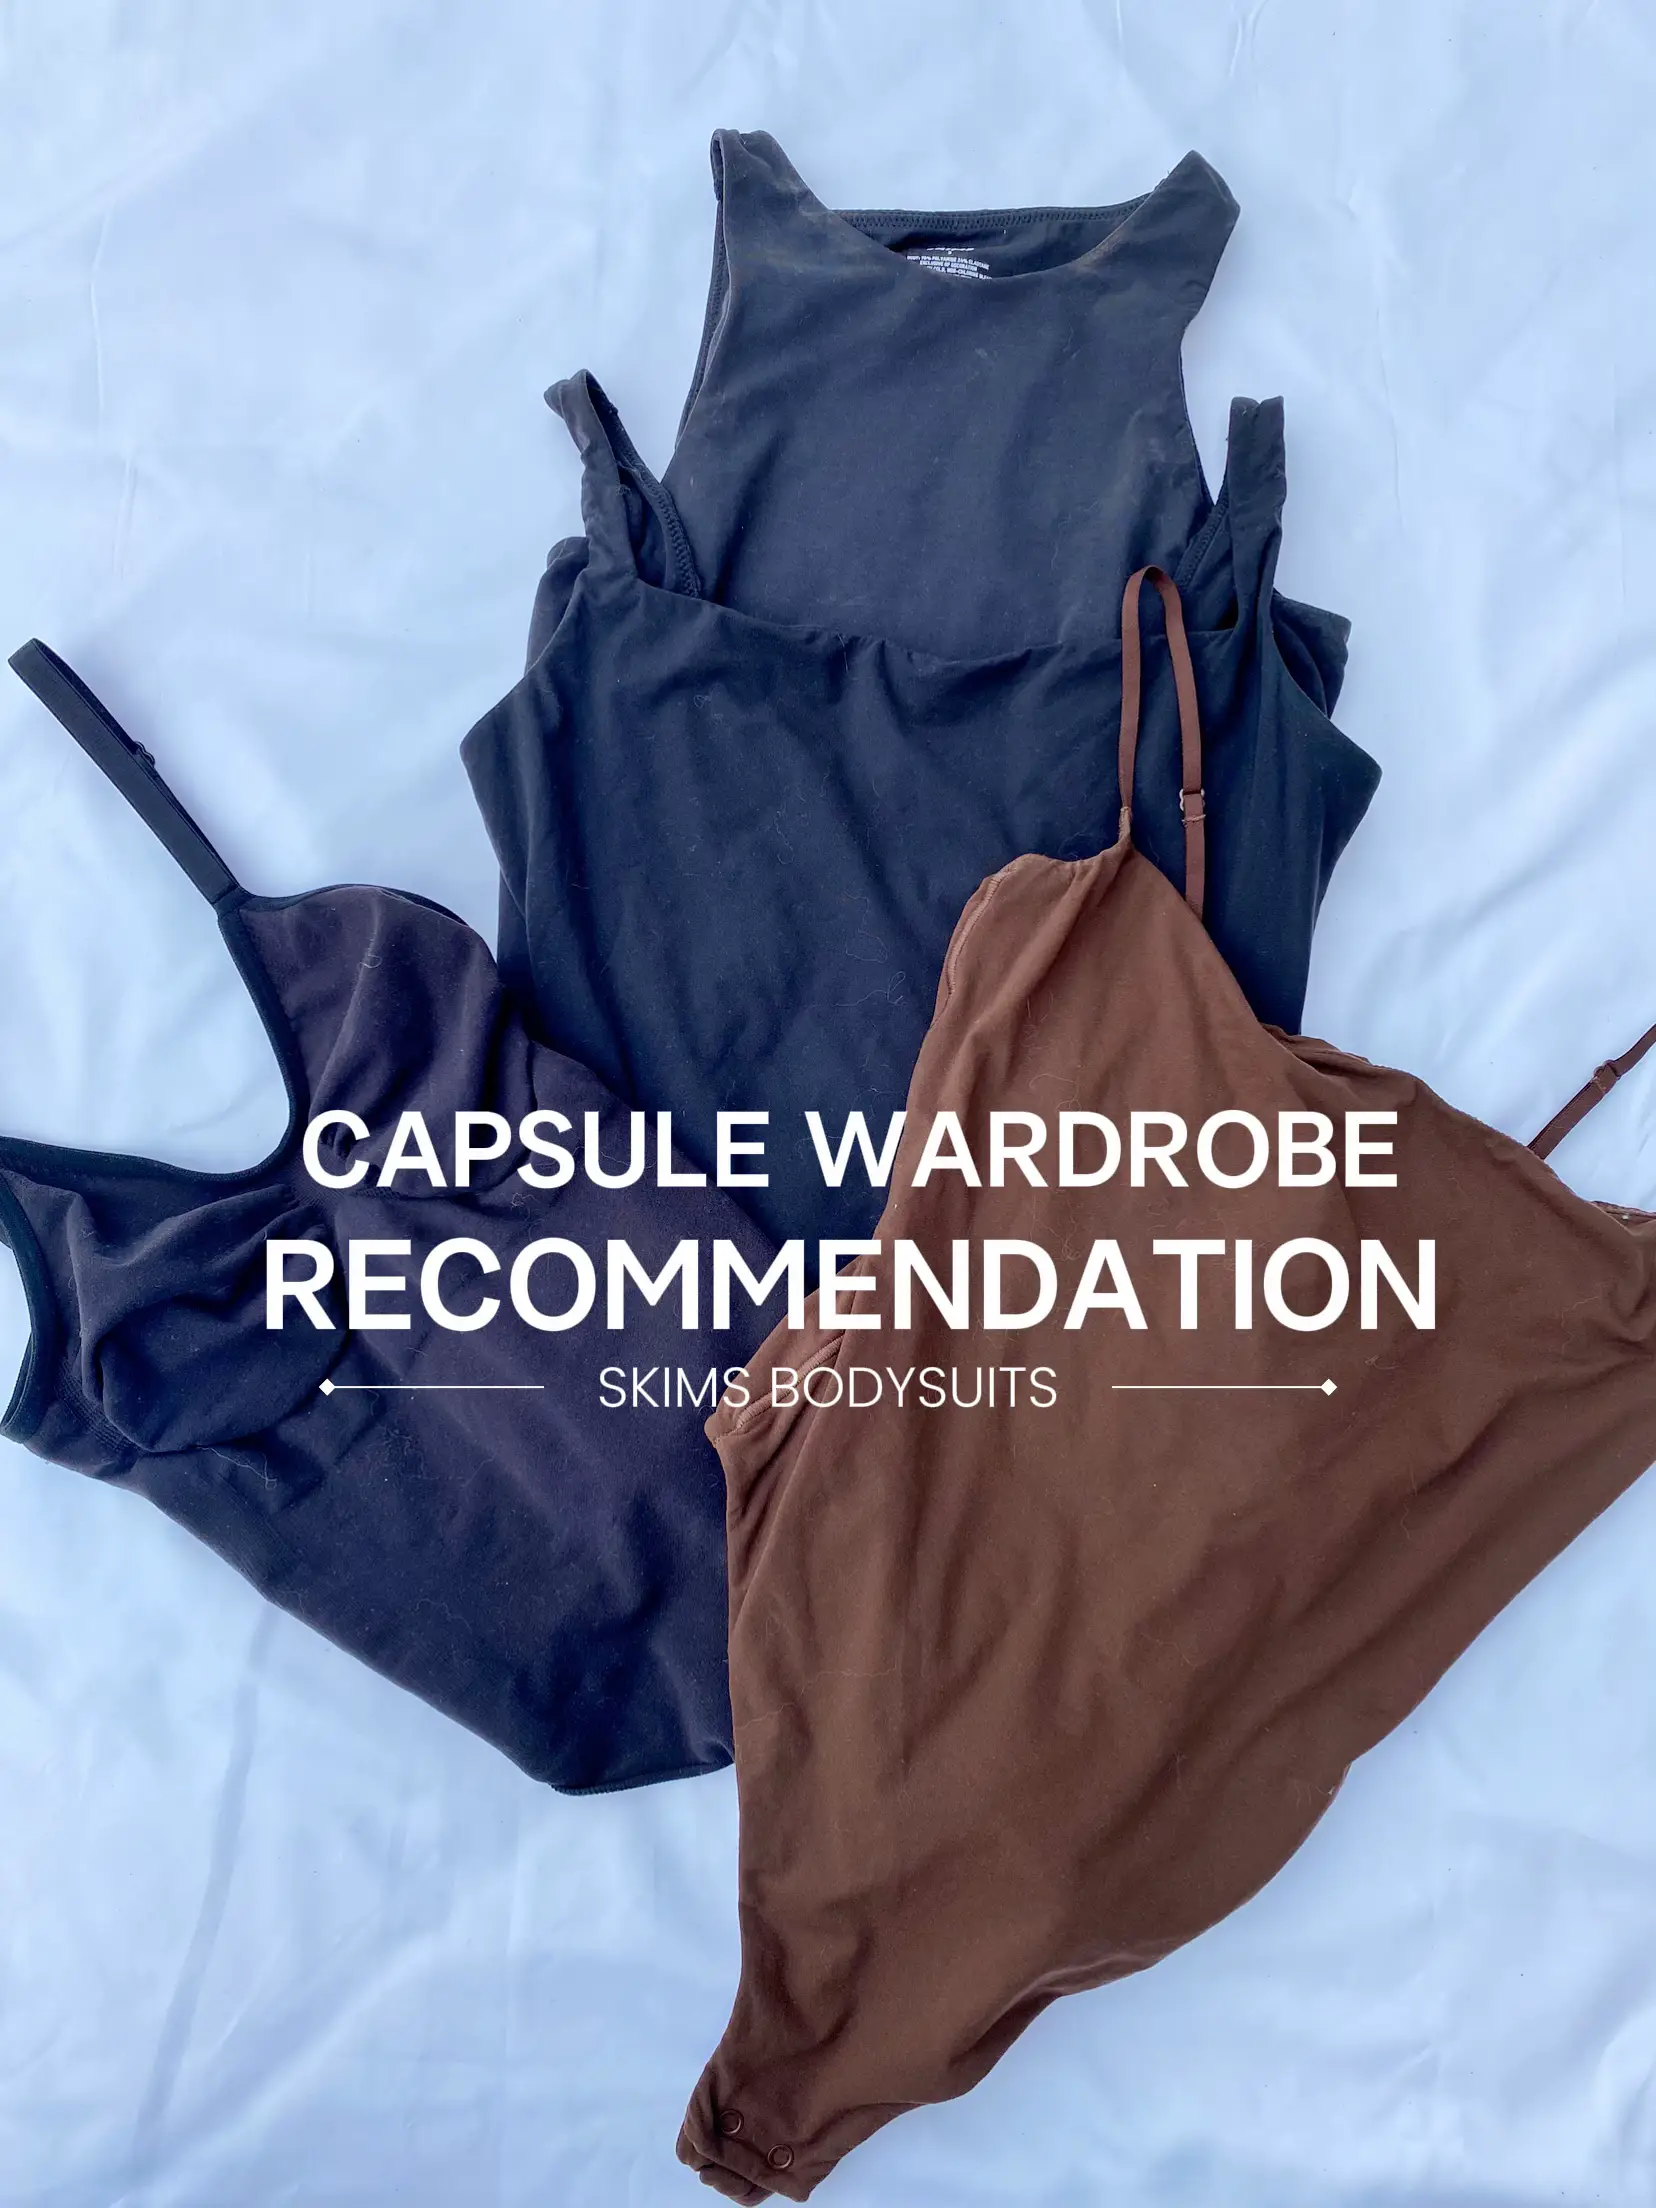 3 Types of Bodysuits: Capsule Wardrobe, Gallery posted by Pattipan